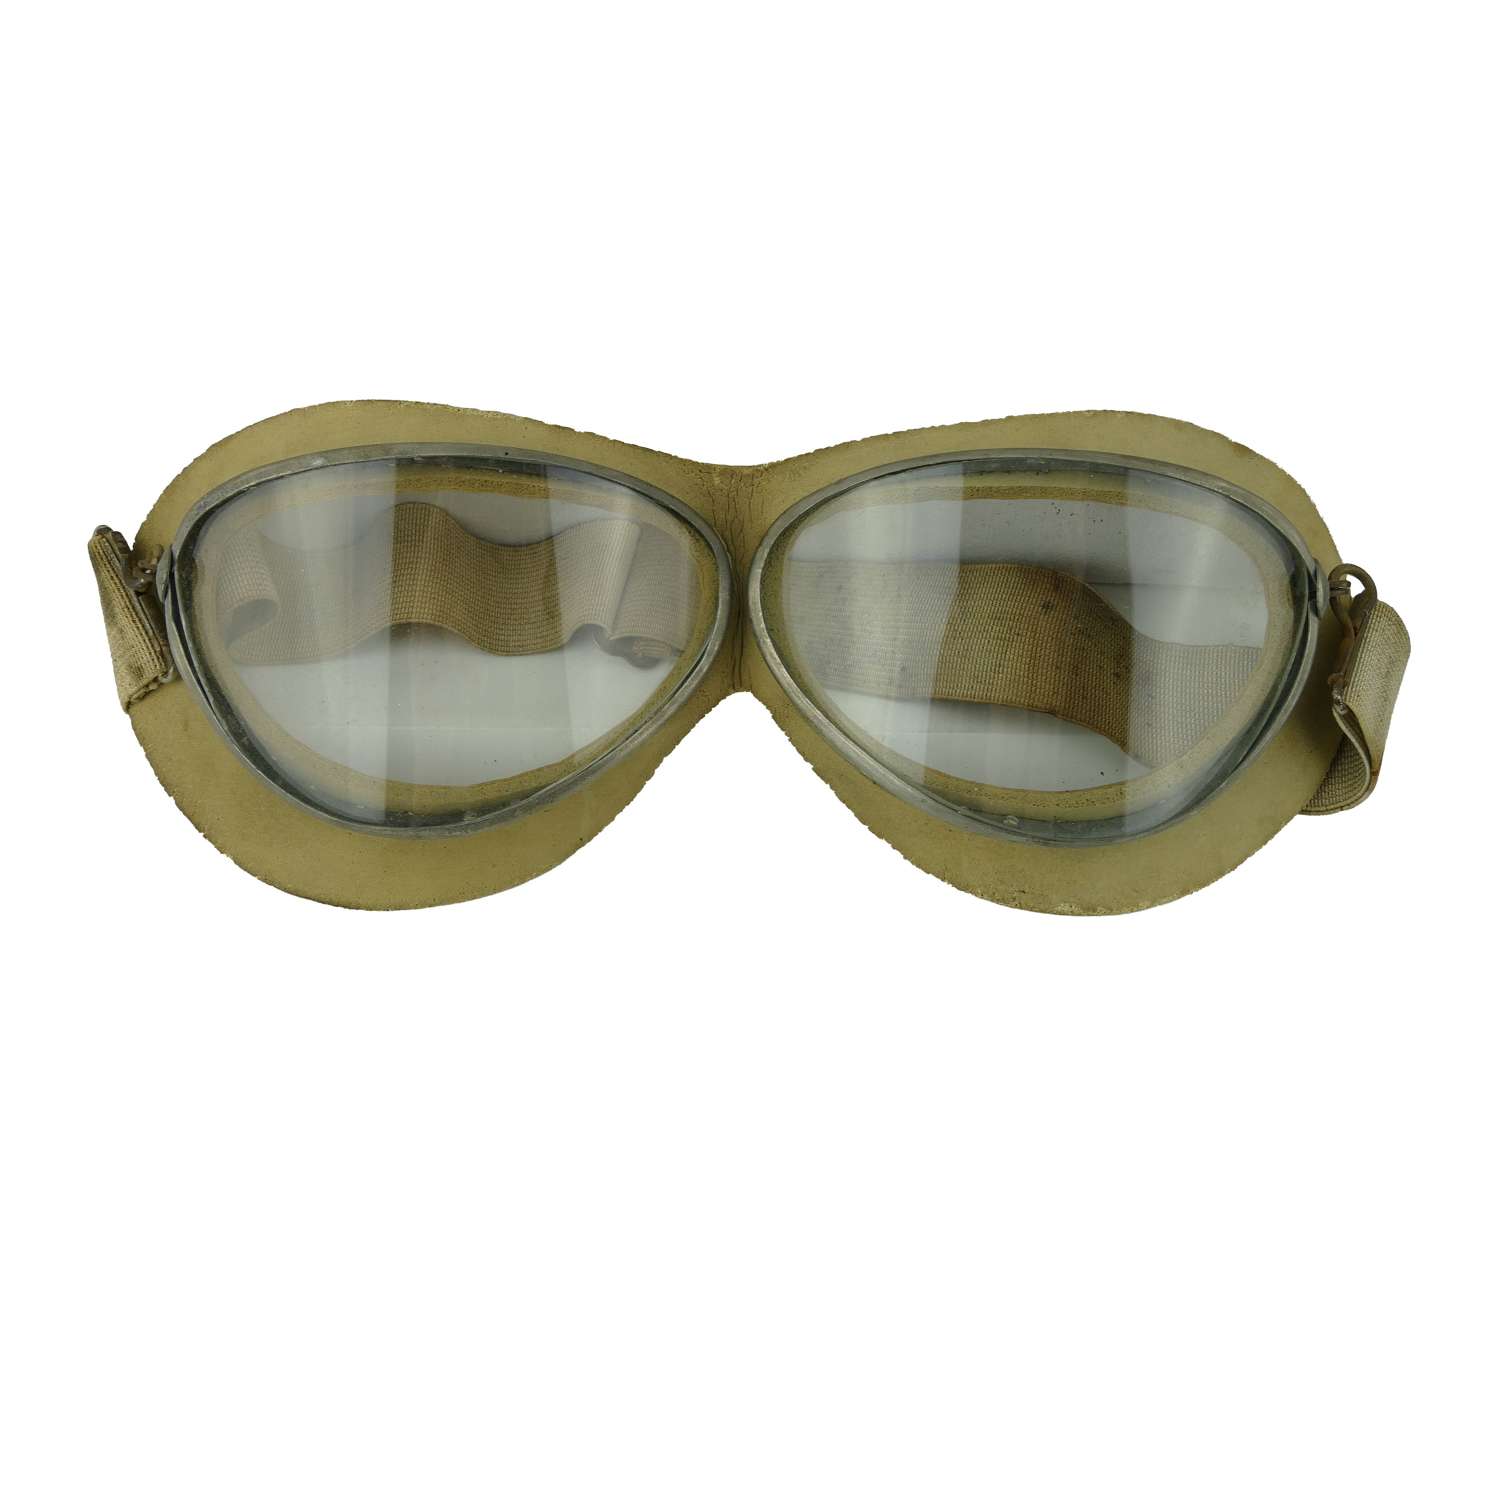 Luftwaffe 295 'type' goggles